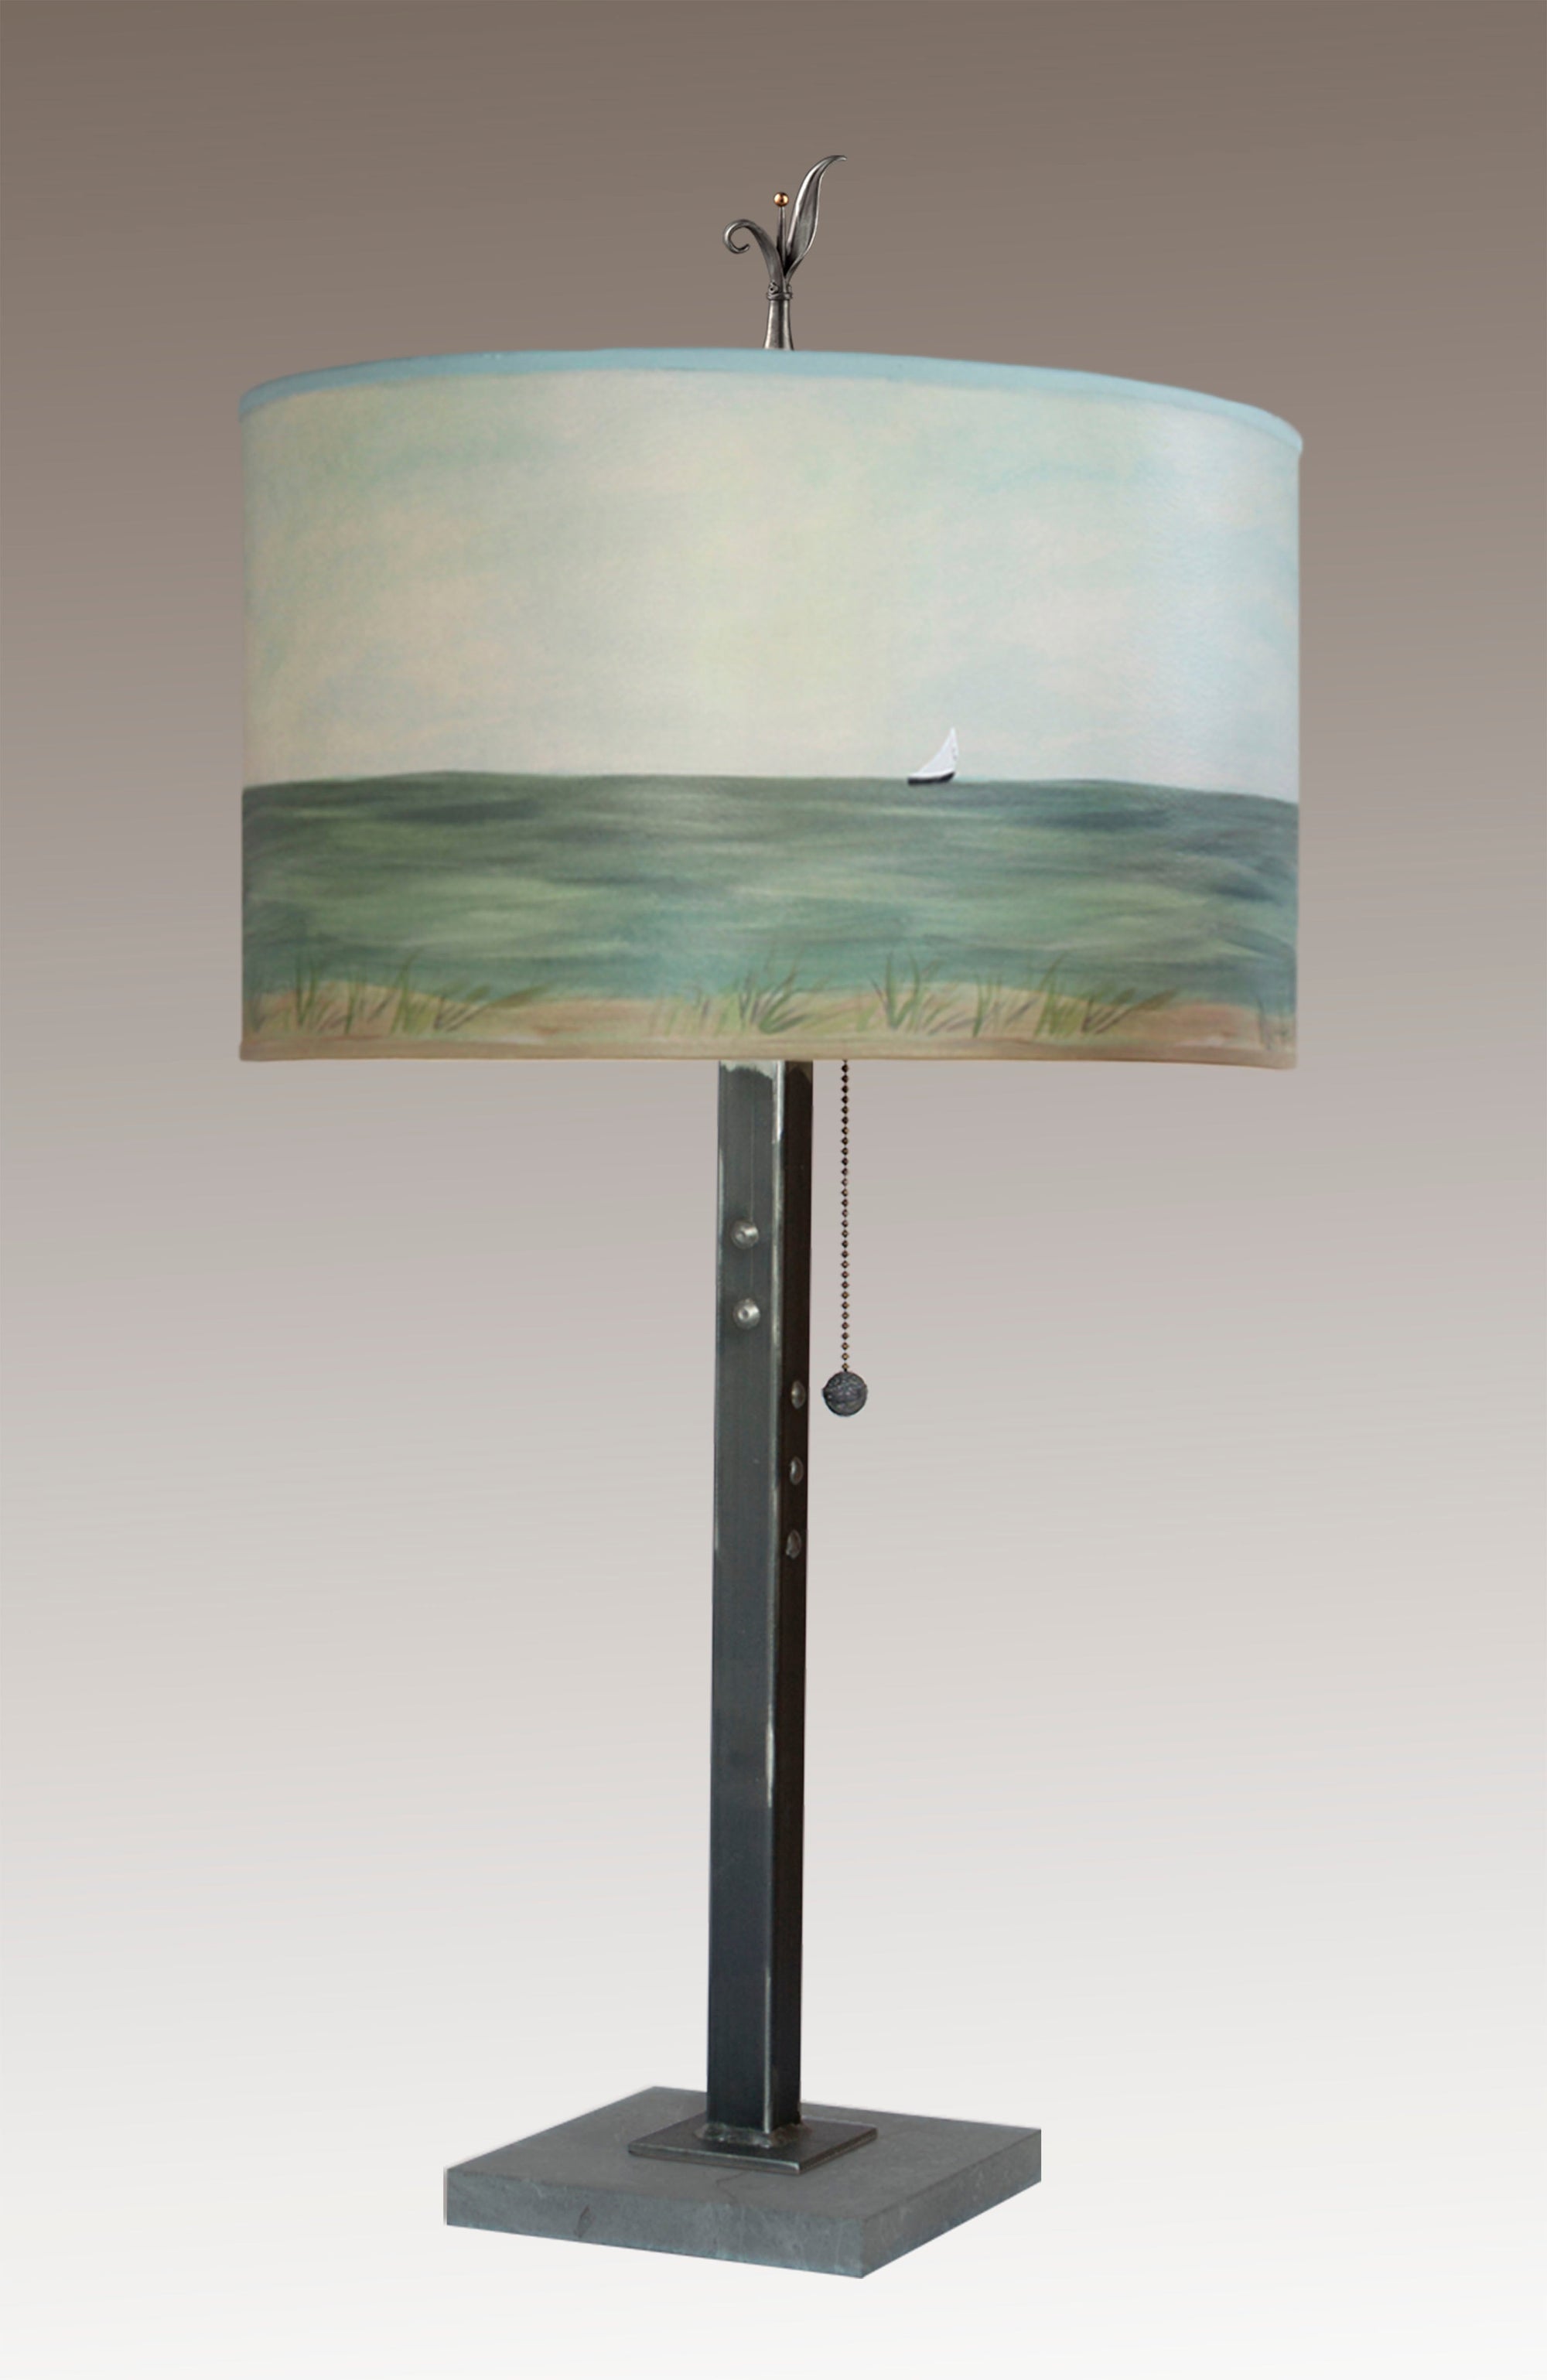 Janna Ugone & Co Table Lamps Steel Table Lamp with Large Drum Shade in Shore